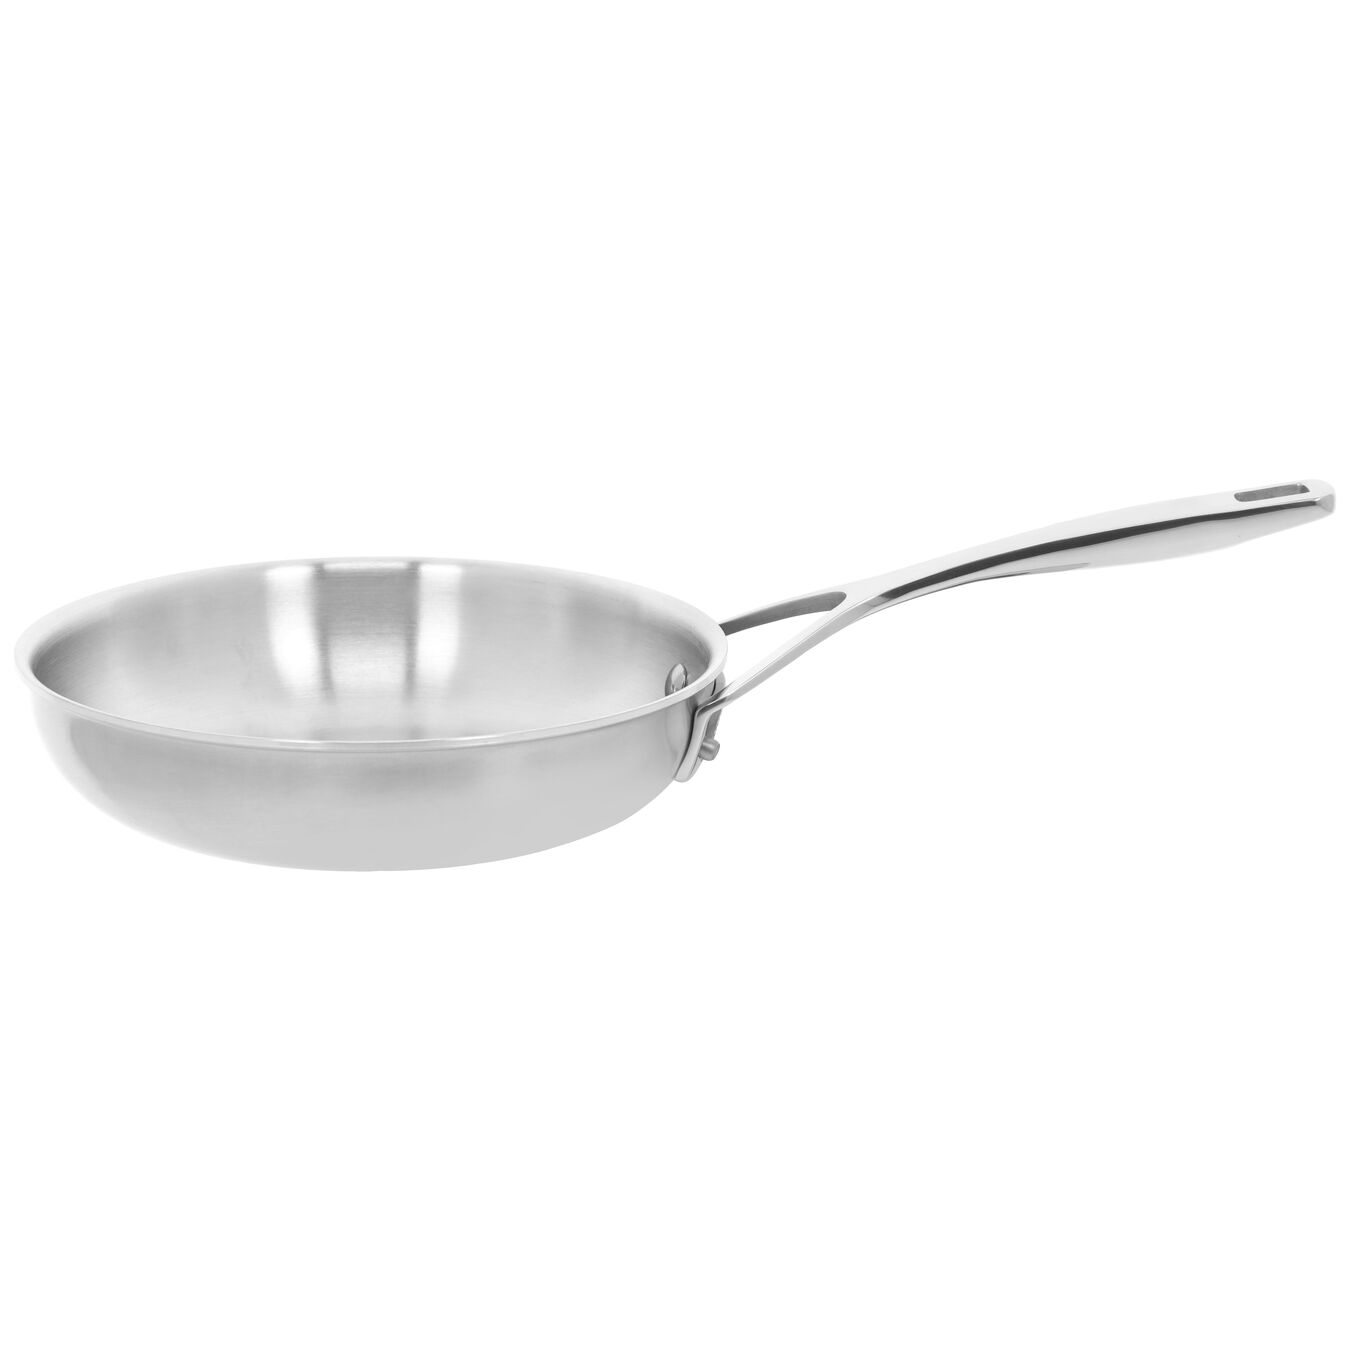 32 cm / 12.5 inch 18/10 Stainless Steel frying pan with lid,,large 2